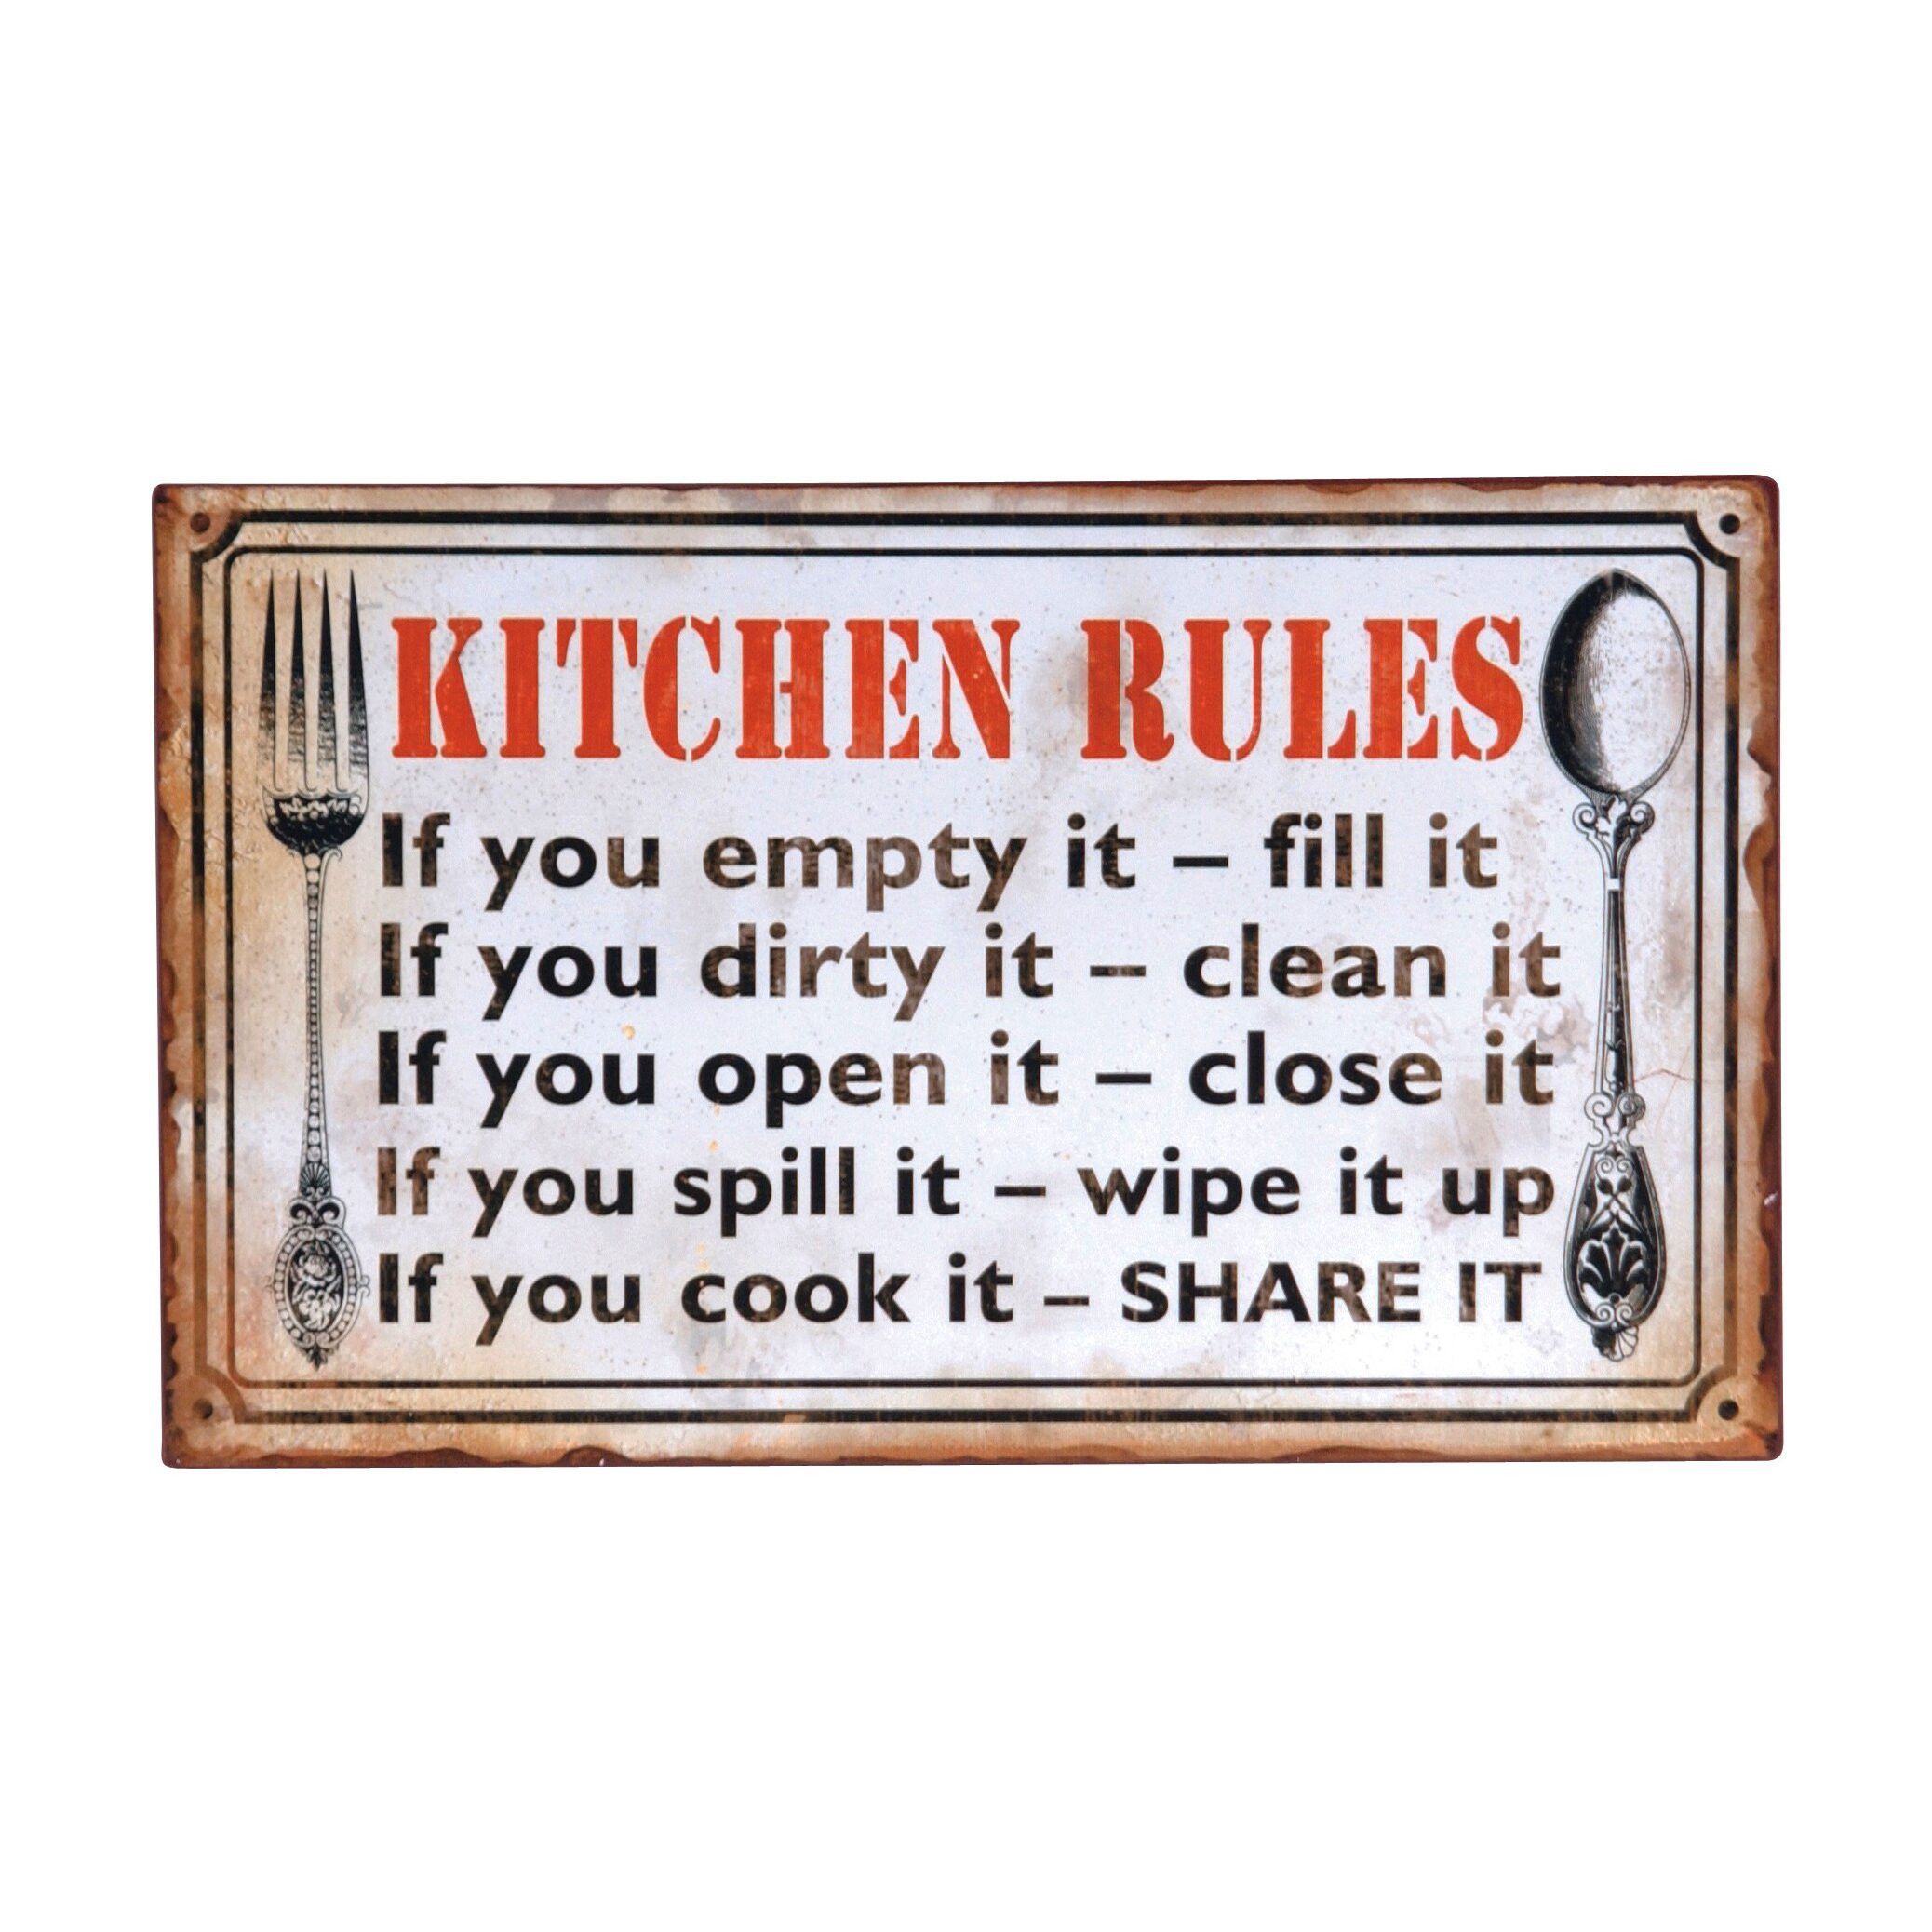 Kitchen Rules Wall Decor
 Wilco Home "Kitchen Rules" Textual Art Plaque & Reviews